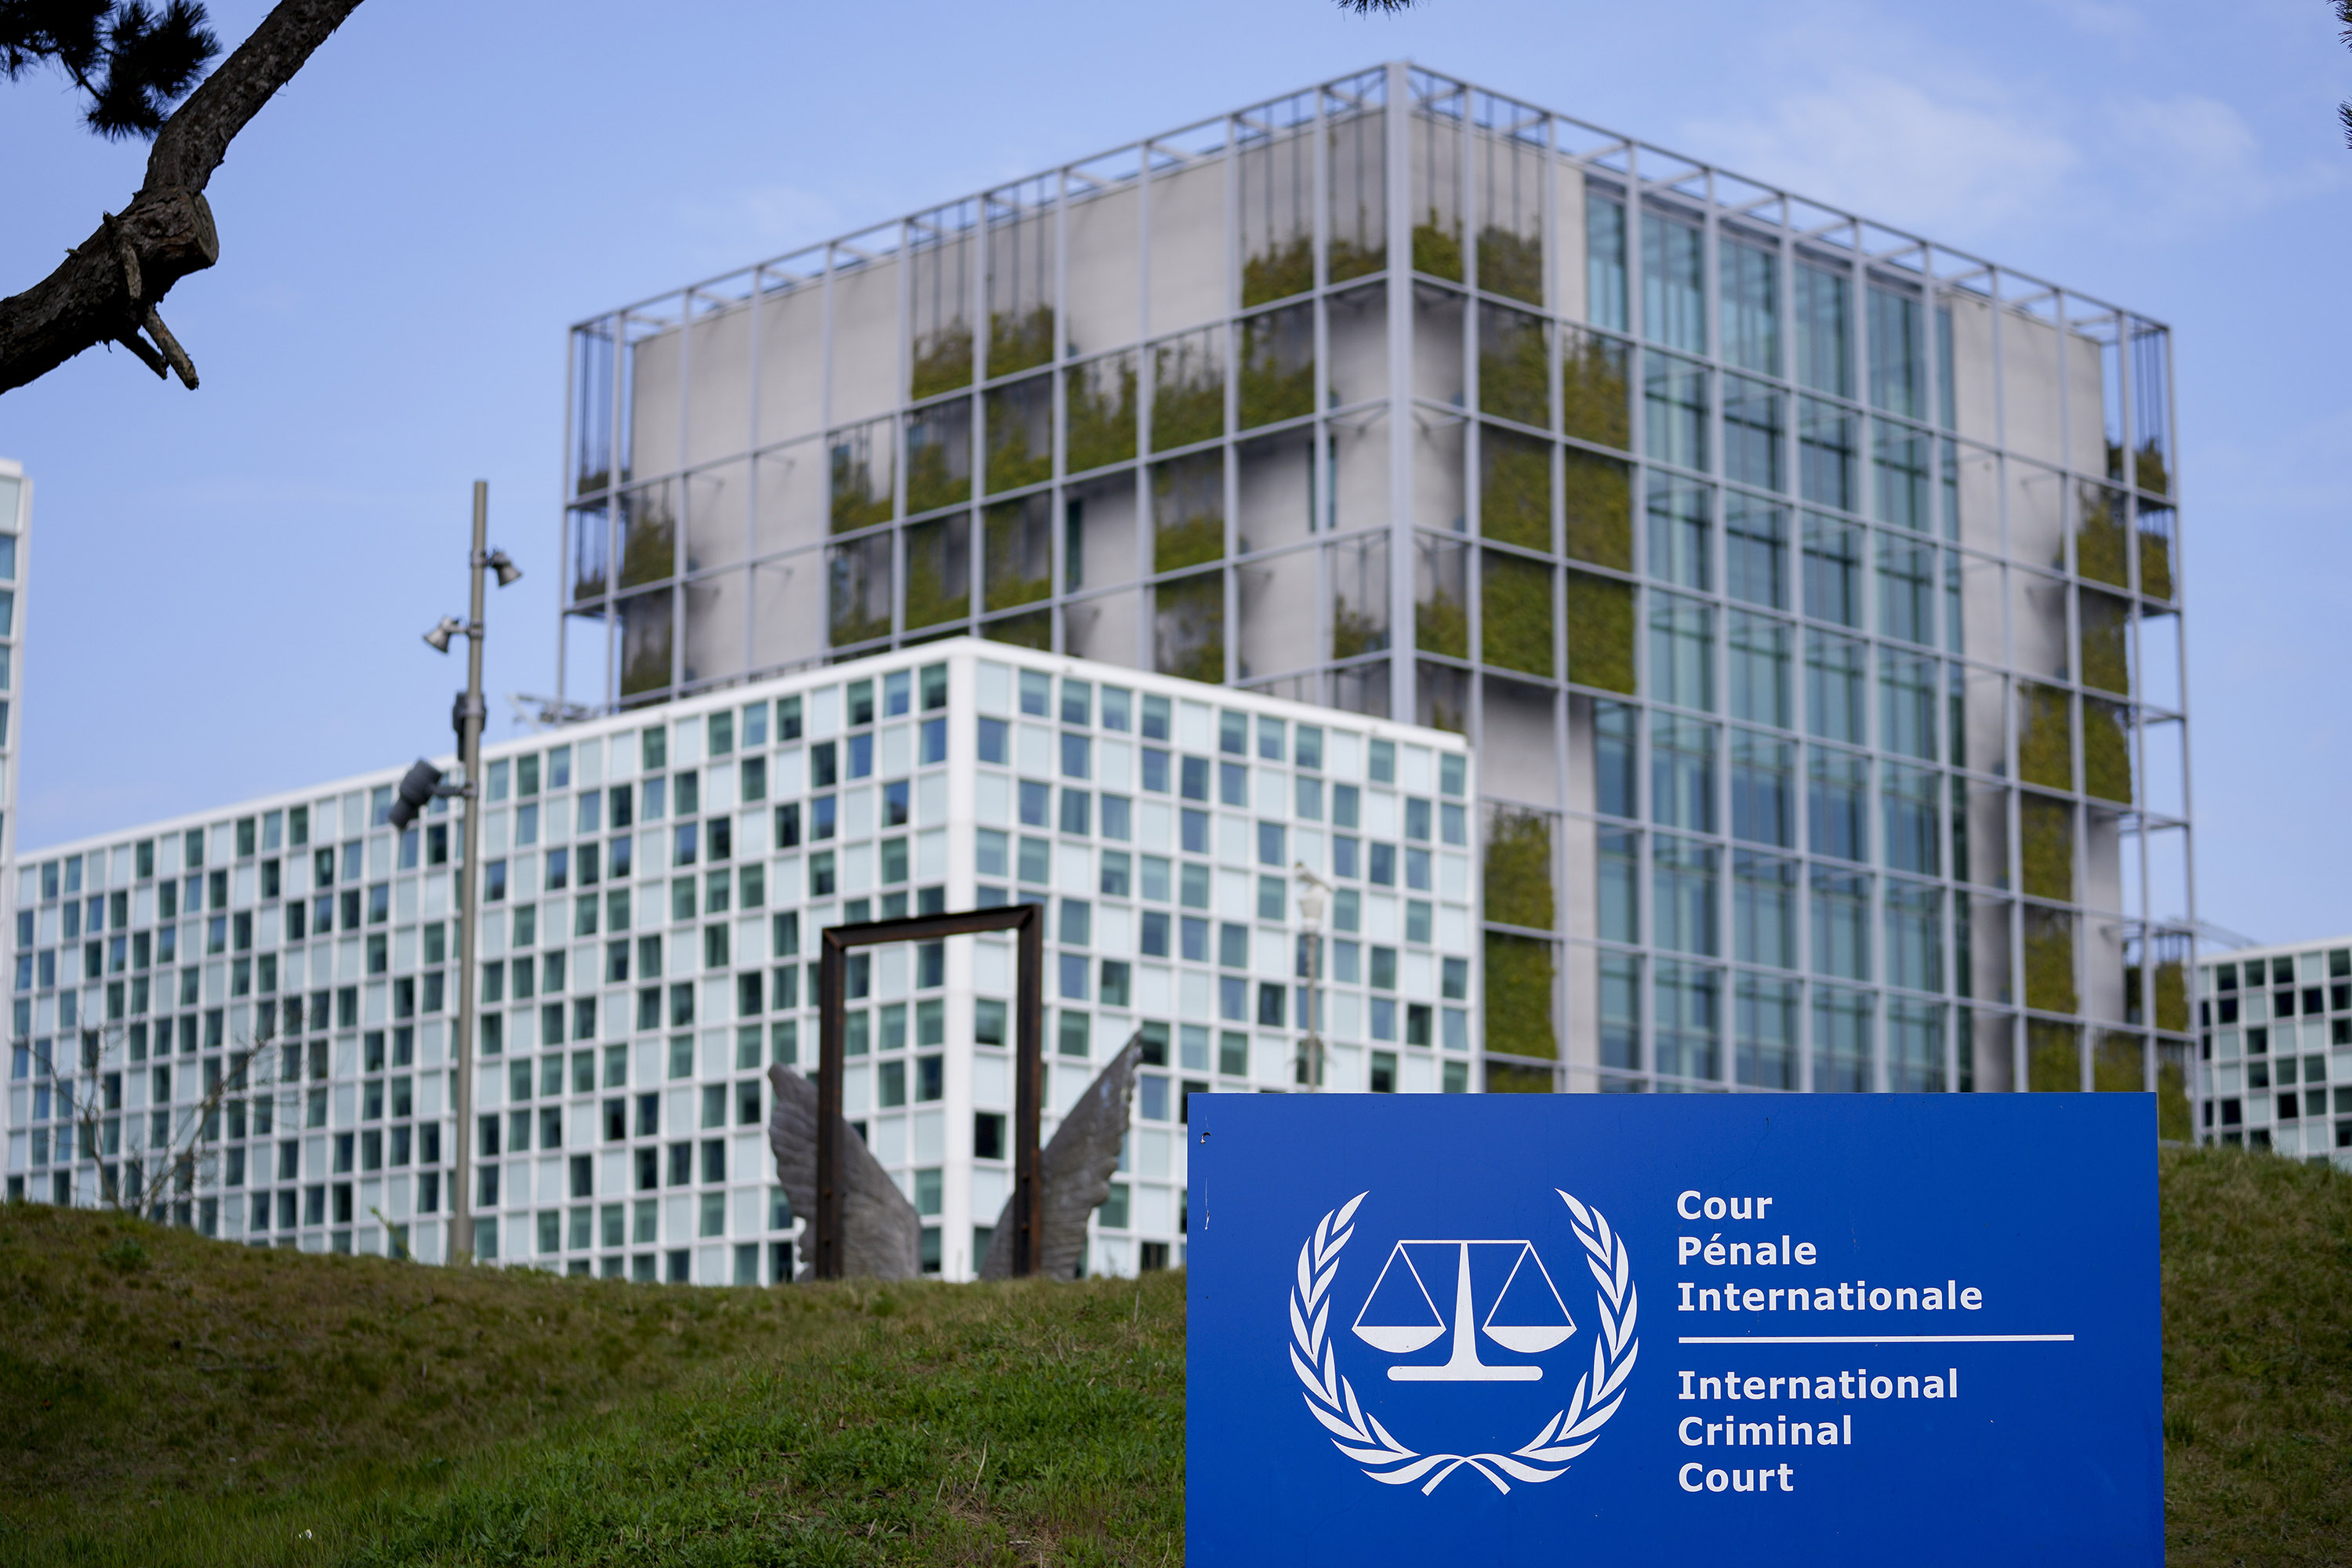 The International Criminal Court (ICC) is pictured in March 2022, in The Hague, Netherlands.